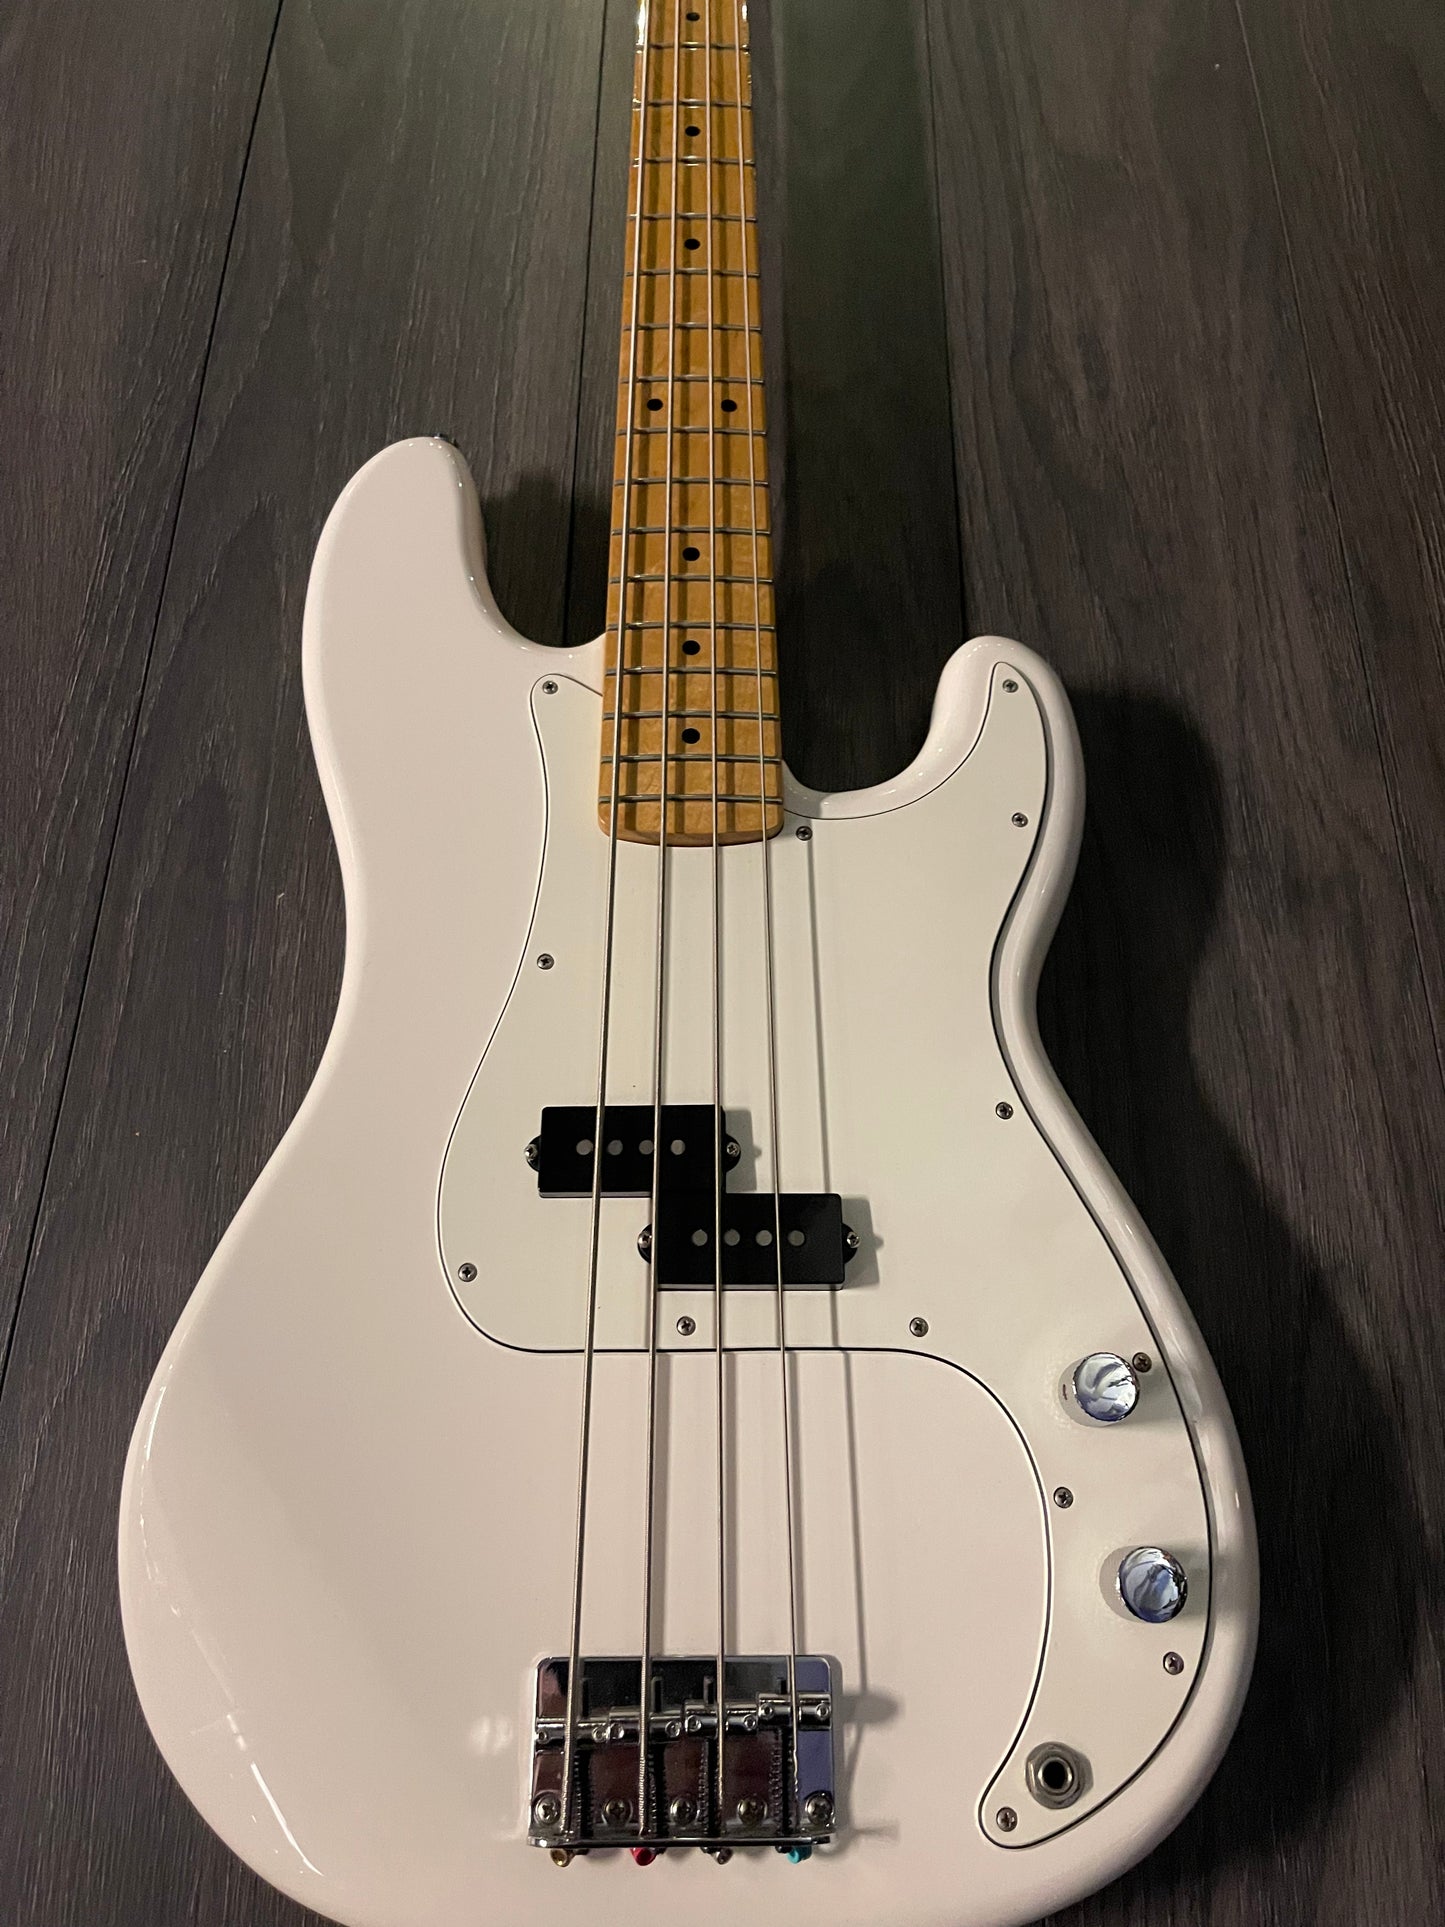 Fender Player Series Precision Bass Guitar (pre-owned)